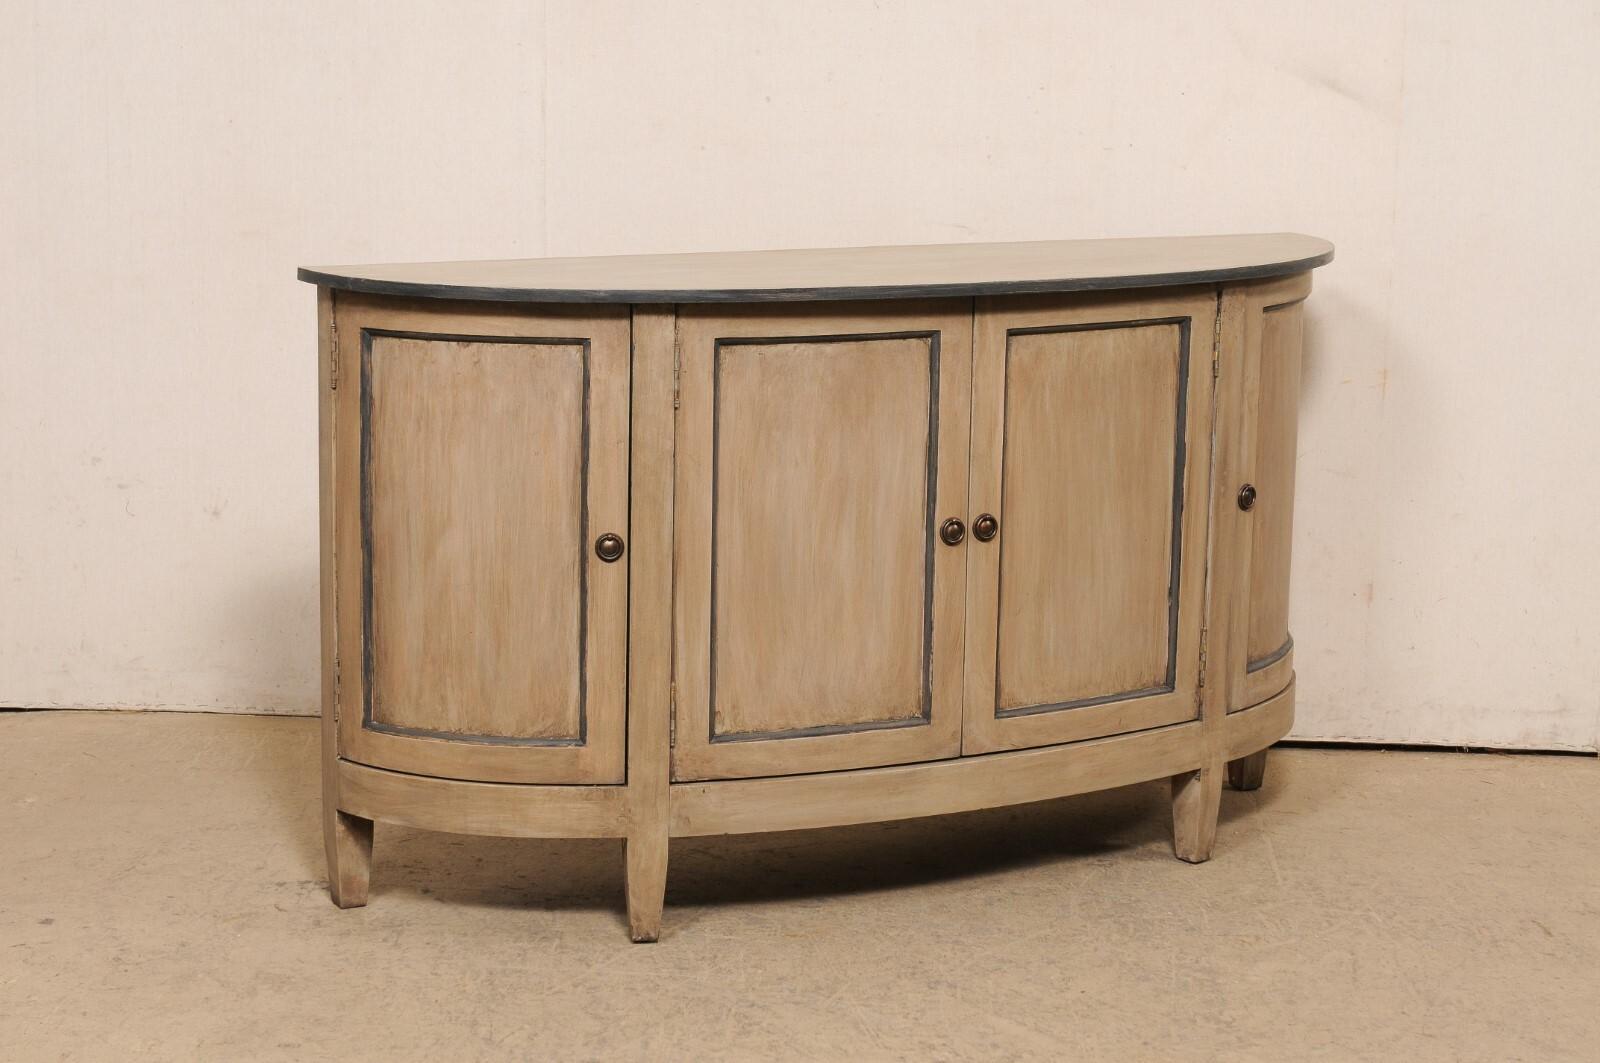 North American Vintage Painted Demi-Lune Console Cabinet, Clean Lines